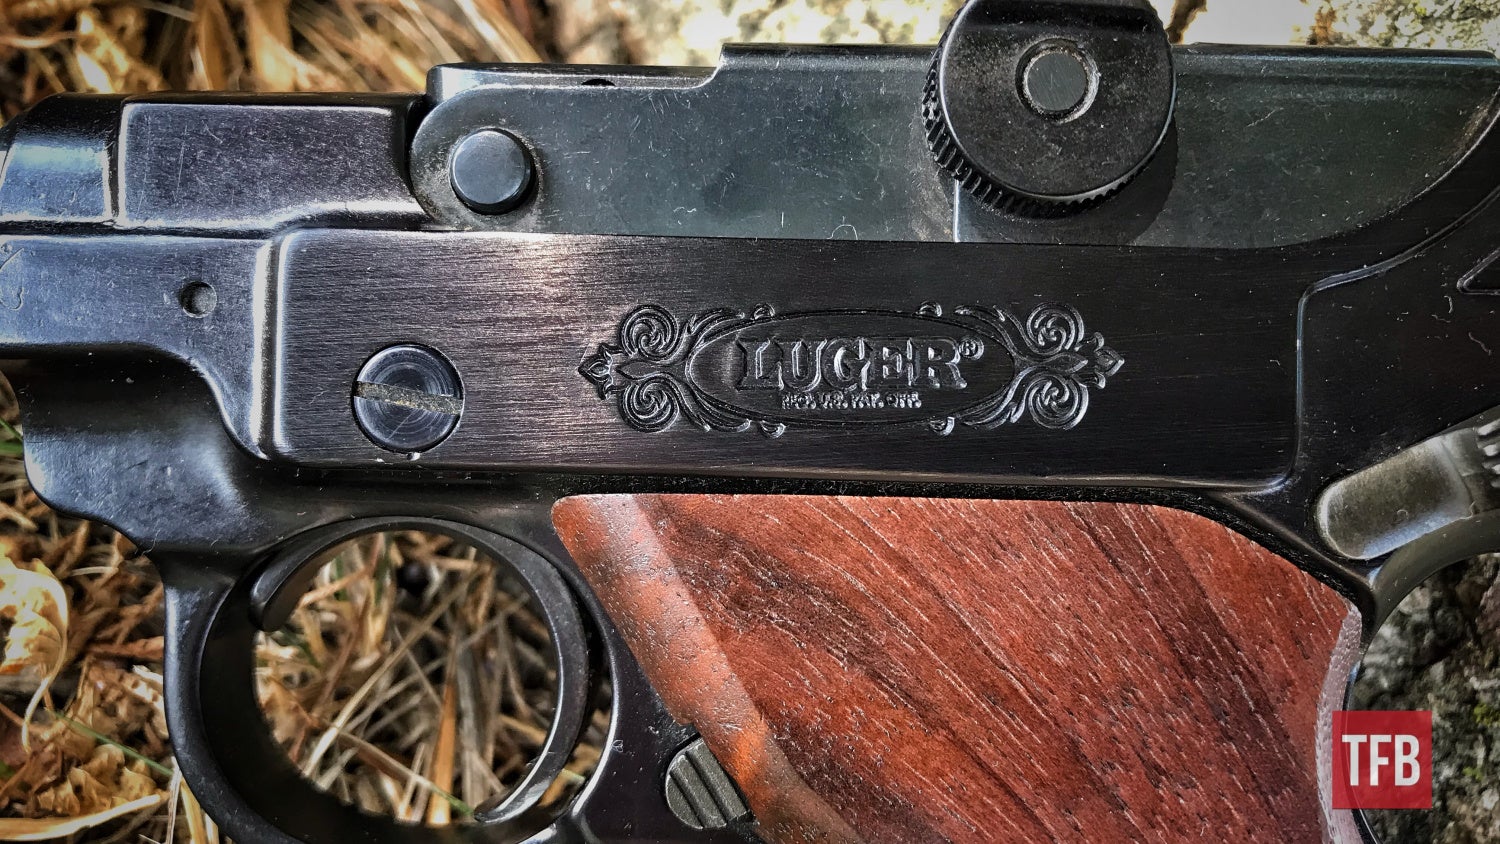 Stoeger Luger